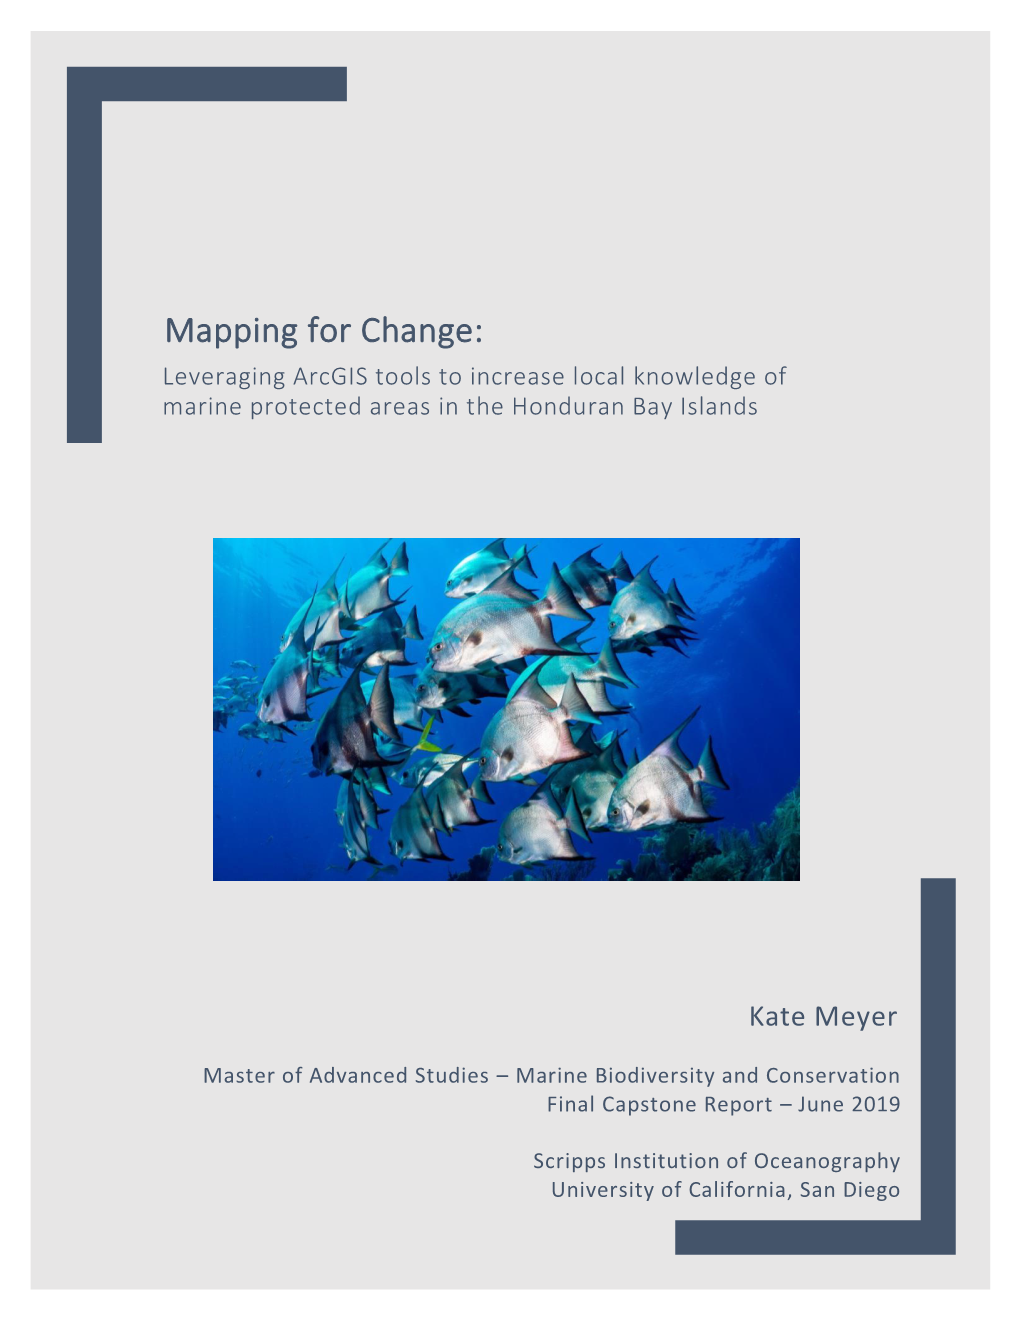 Mapping for Change: Leveraging Arcgis Tools to Increase Local Knowledge of Marine Protected Areas in the Honduran Bay Islands